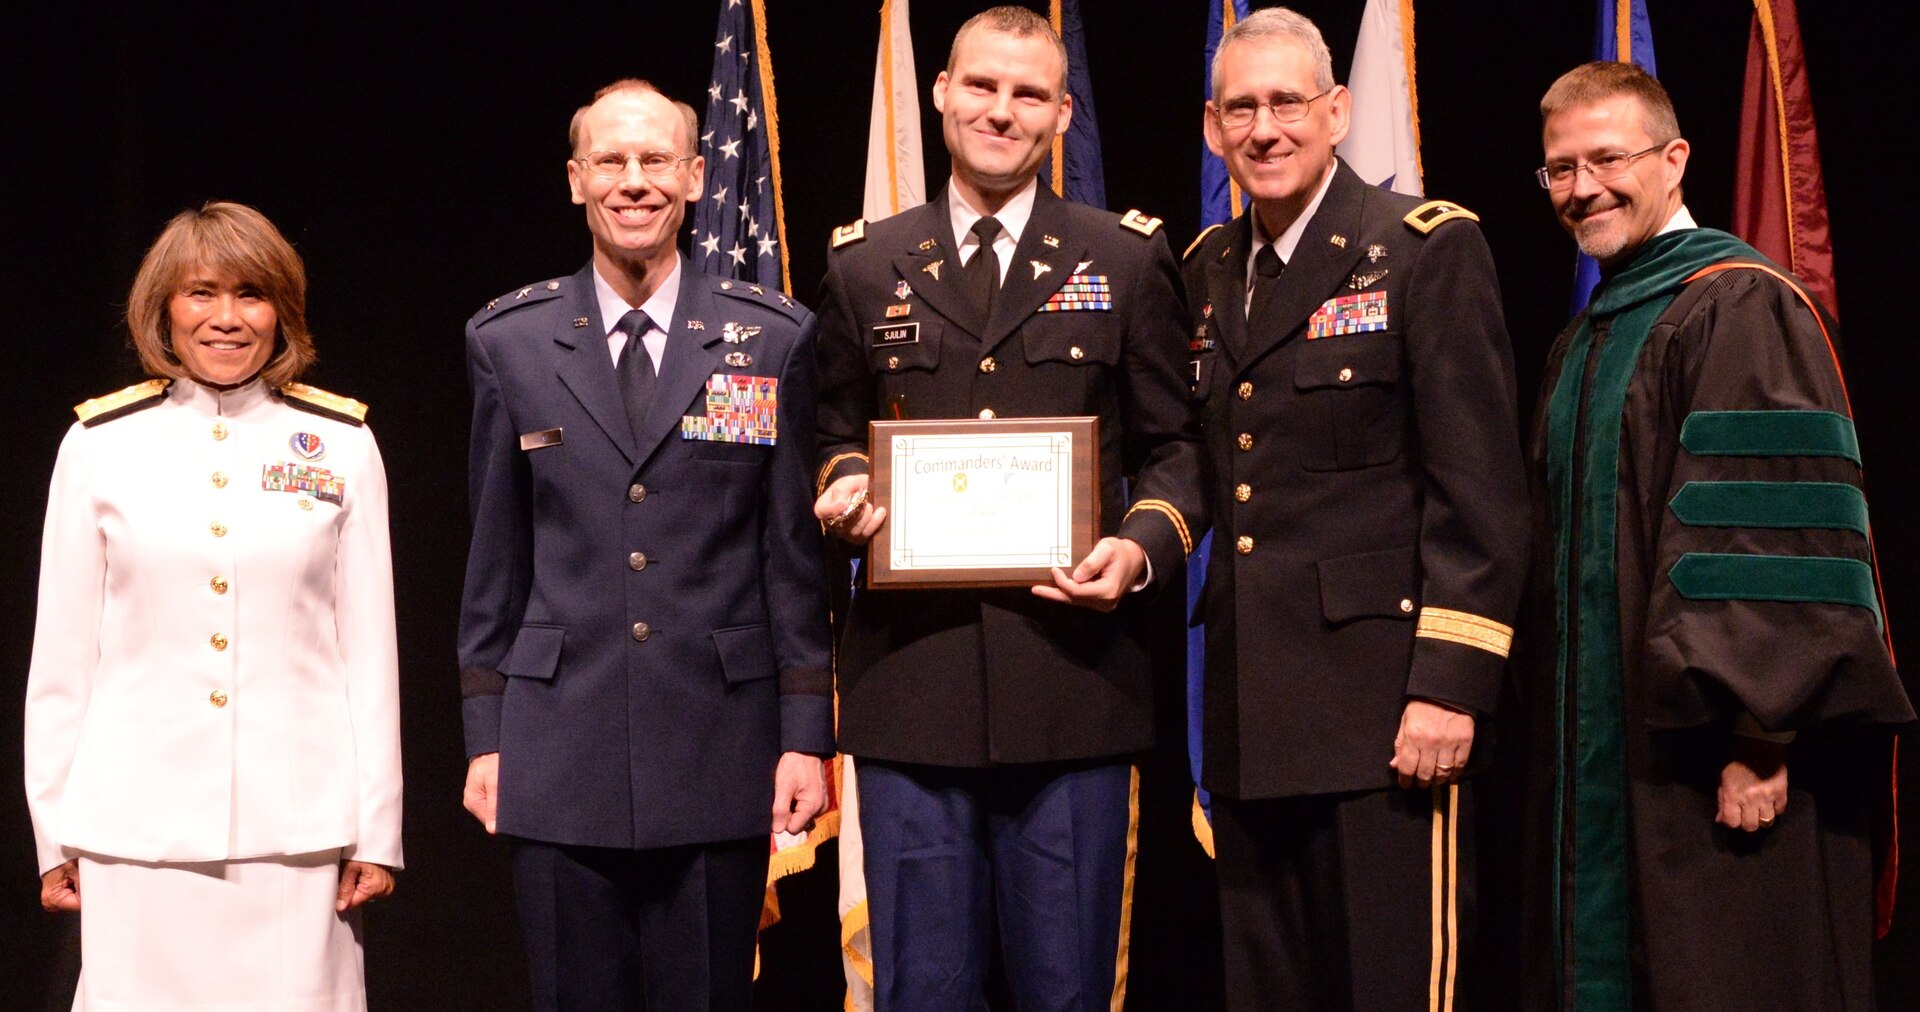 Army Maj. Tyson Sjulin, pulmonary/critical care fellow, receives the Commander’s Award for Fellow Clinical Research during the San Antonio Uniformed Services Health Education Consortium graduation ceremony held June 7 at the Lila Cockrell Theatre in downtown San Antonio. Also pictured are (from left) Vice Adm. Raquel Bono, director of the Defense Health Agency; Air Force Maj. Gen. Bart O. Iddins, 59th Medical Wing commander; Army Brig. Gen. George Appenzeller, Brooke Army Medical Center commander; and Dr. Woodson Scott Jones, dean of SAUSHEC